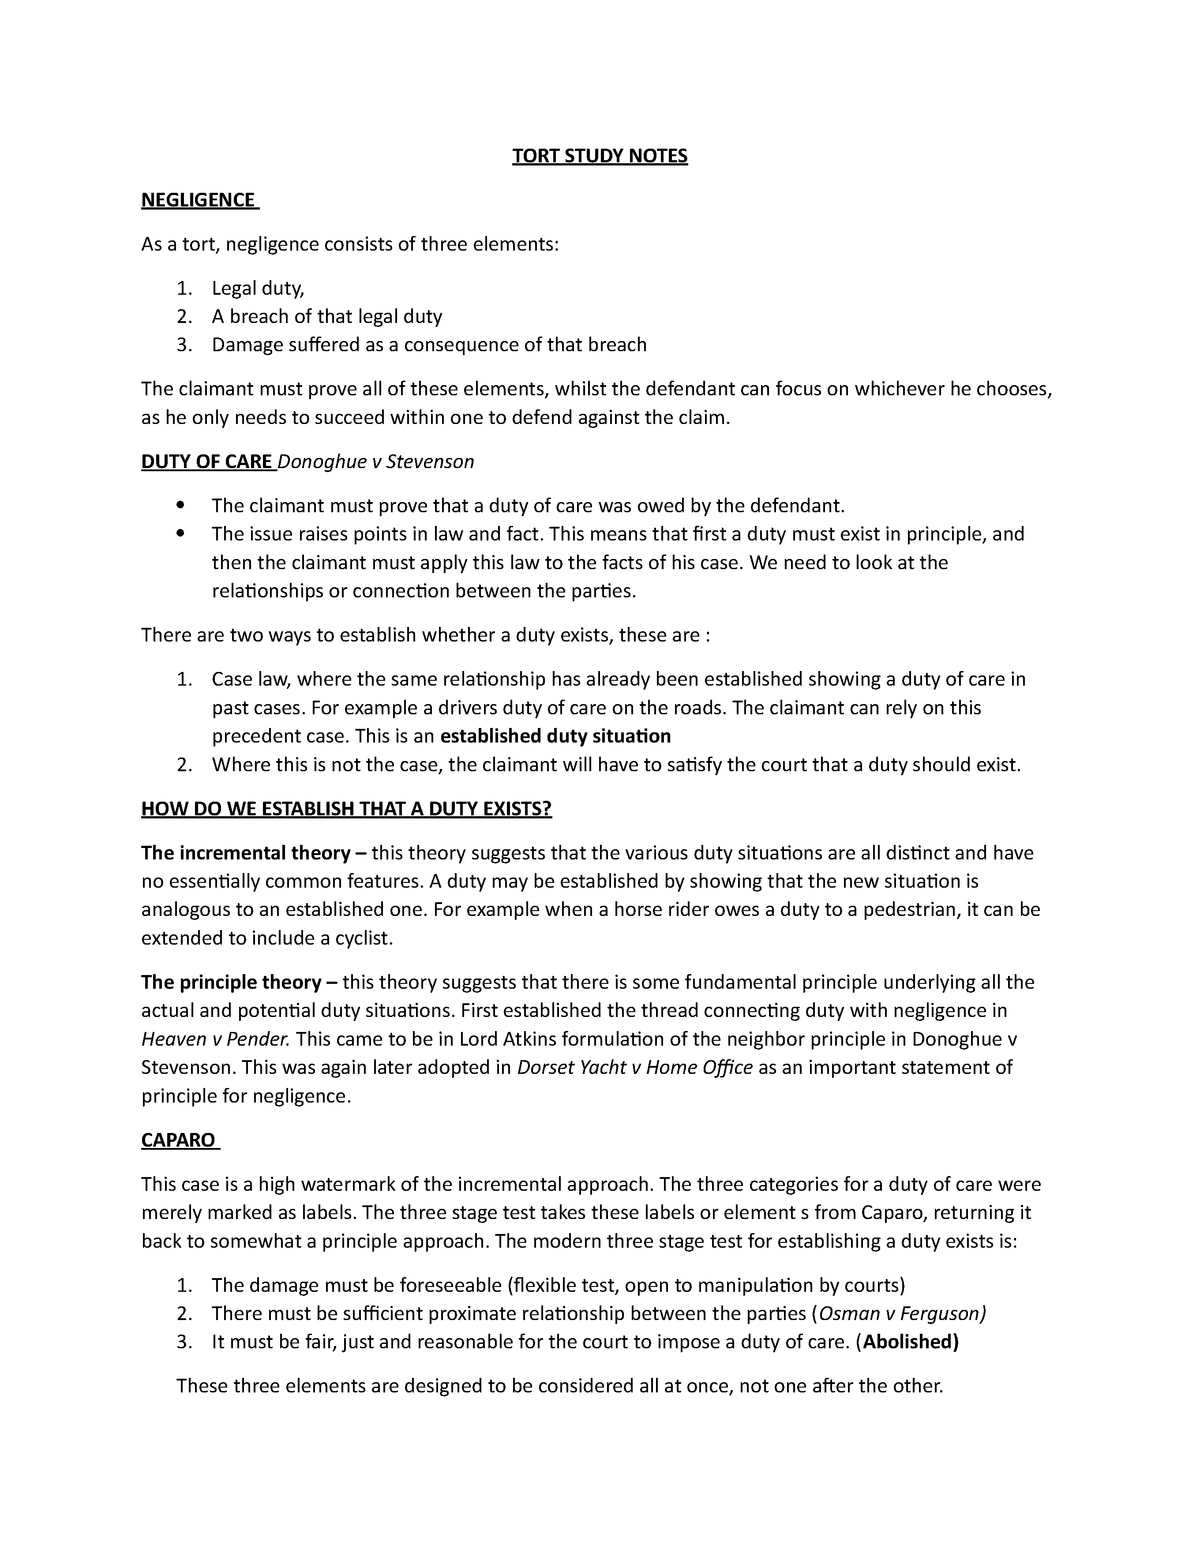 TORT Study Notes - TORT STUDY NOTES NEGLIGENCE As a tort, negligence ...